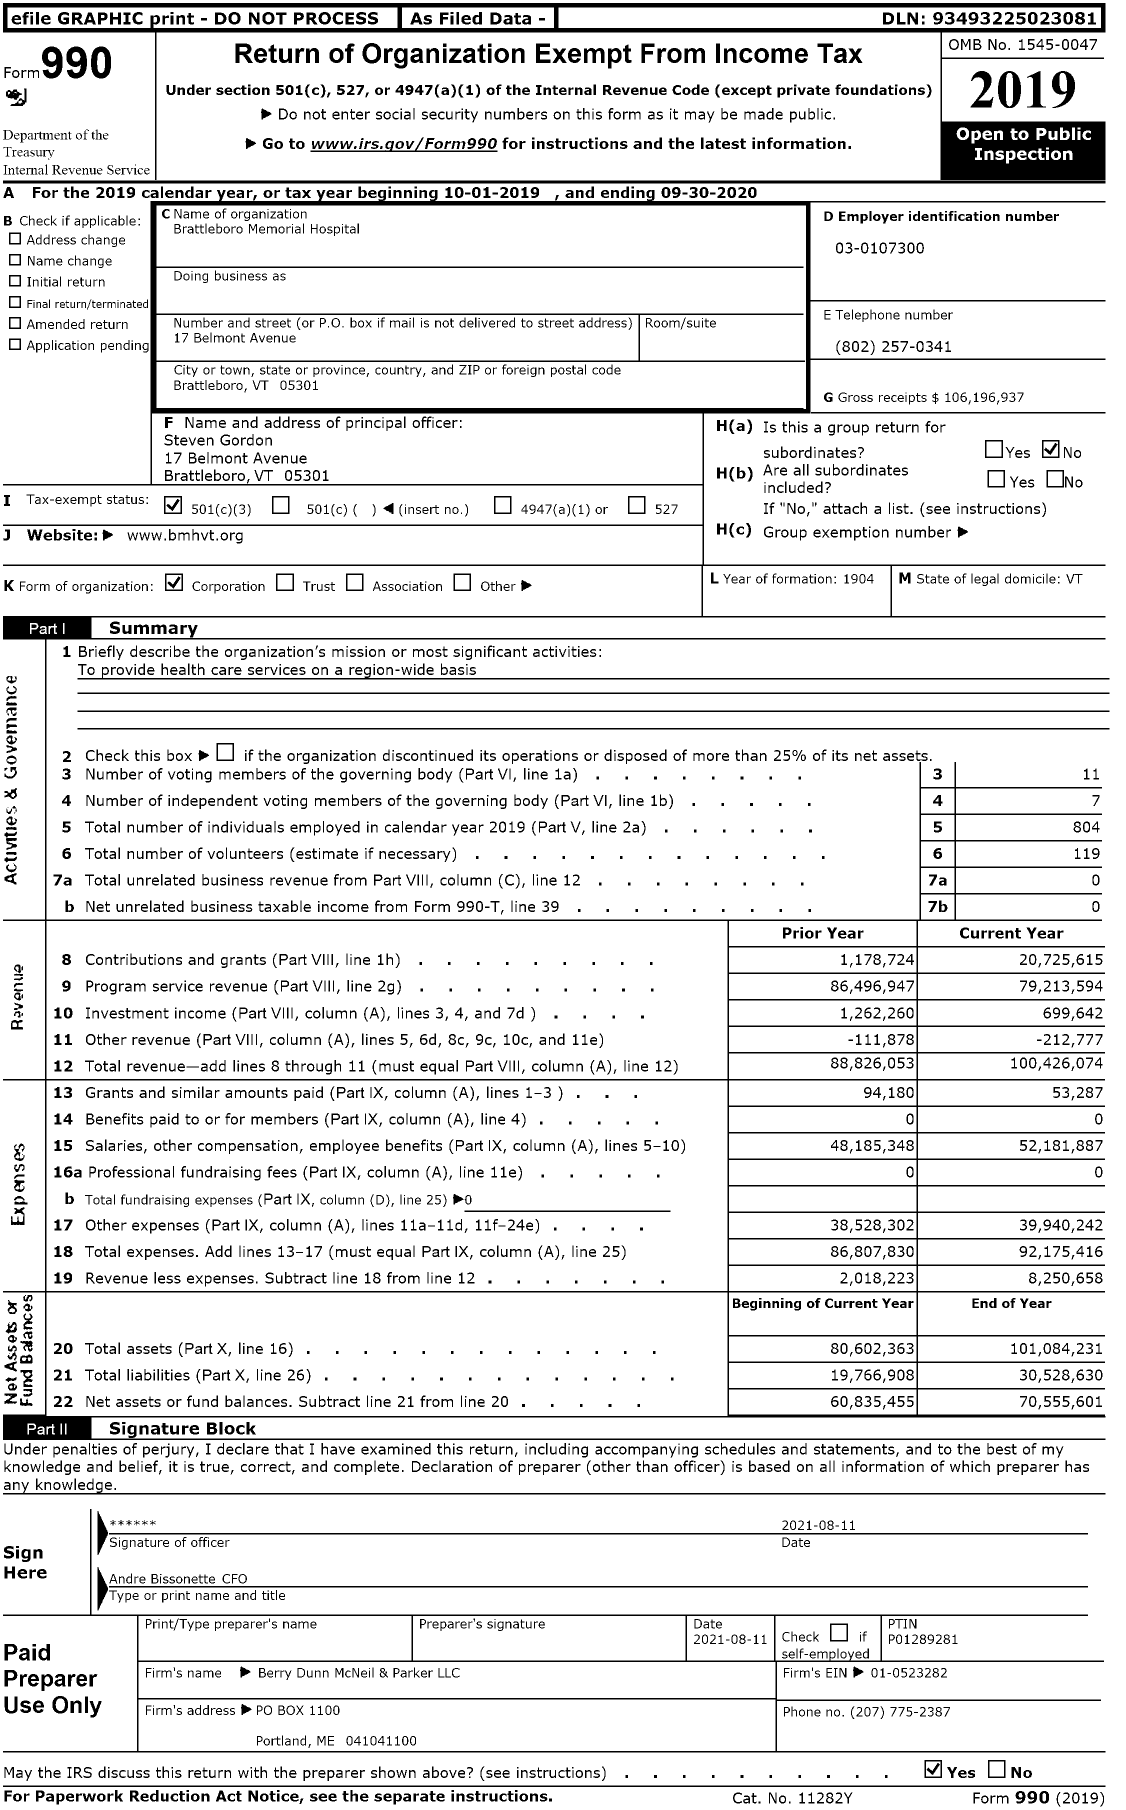 Image of first page of 2019 Form 990 for Brattleboro Memorial Hospital (BMH)